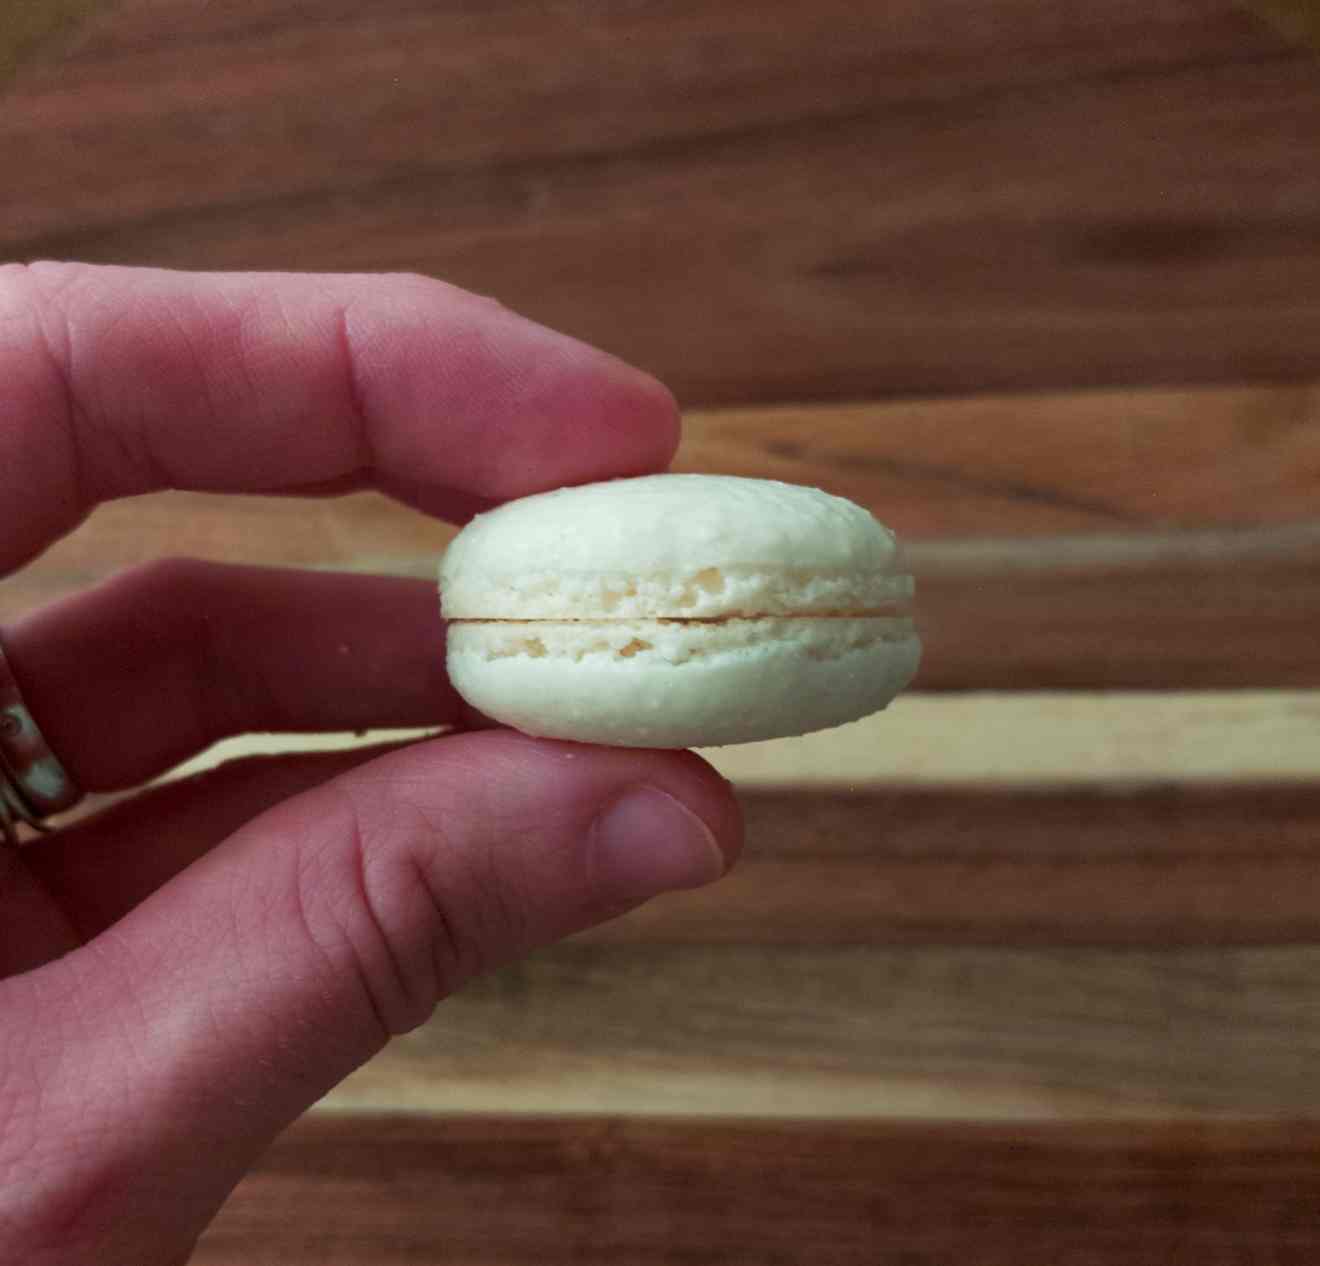 Baked macaron shells in held by a hand.